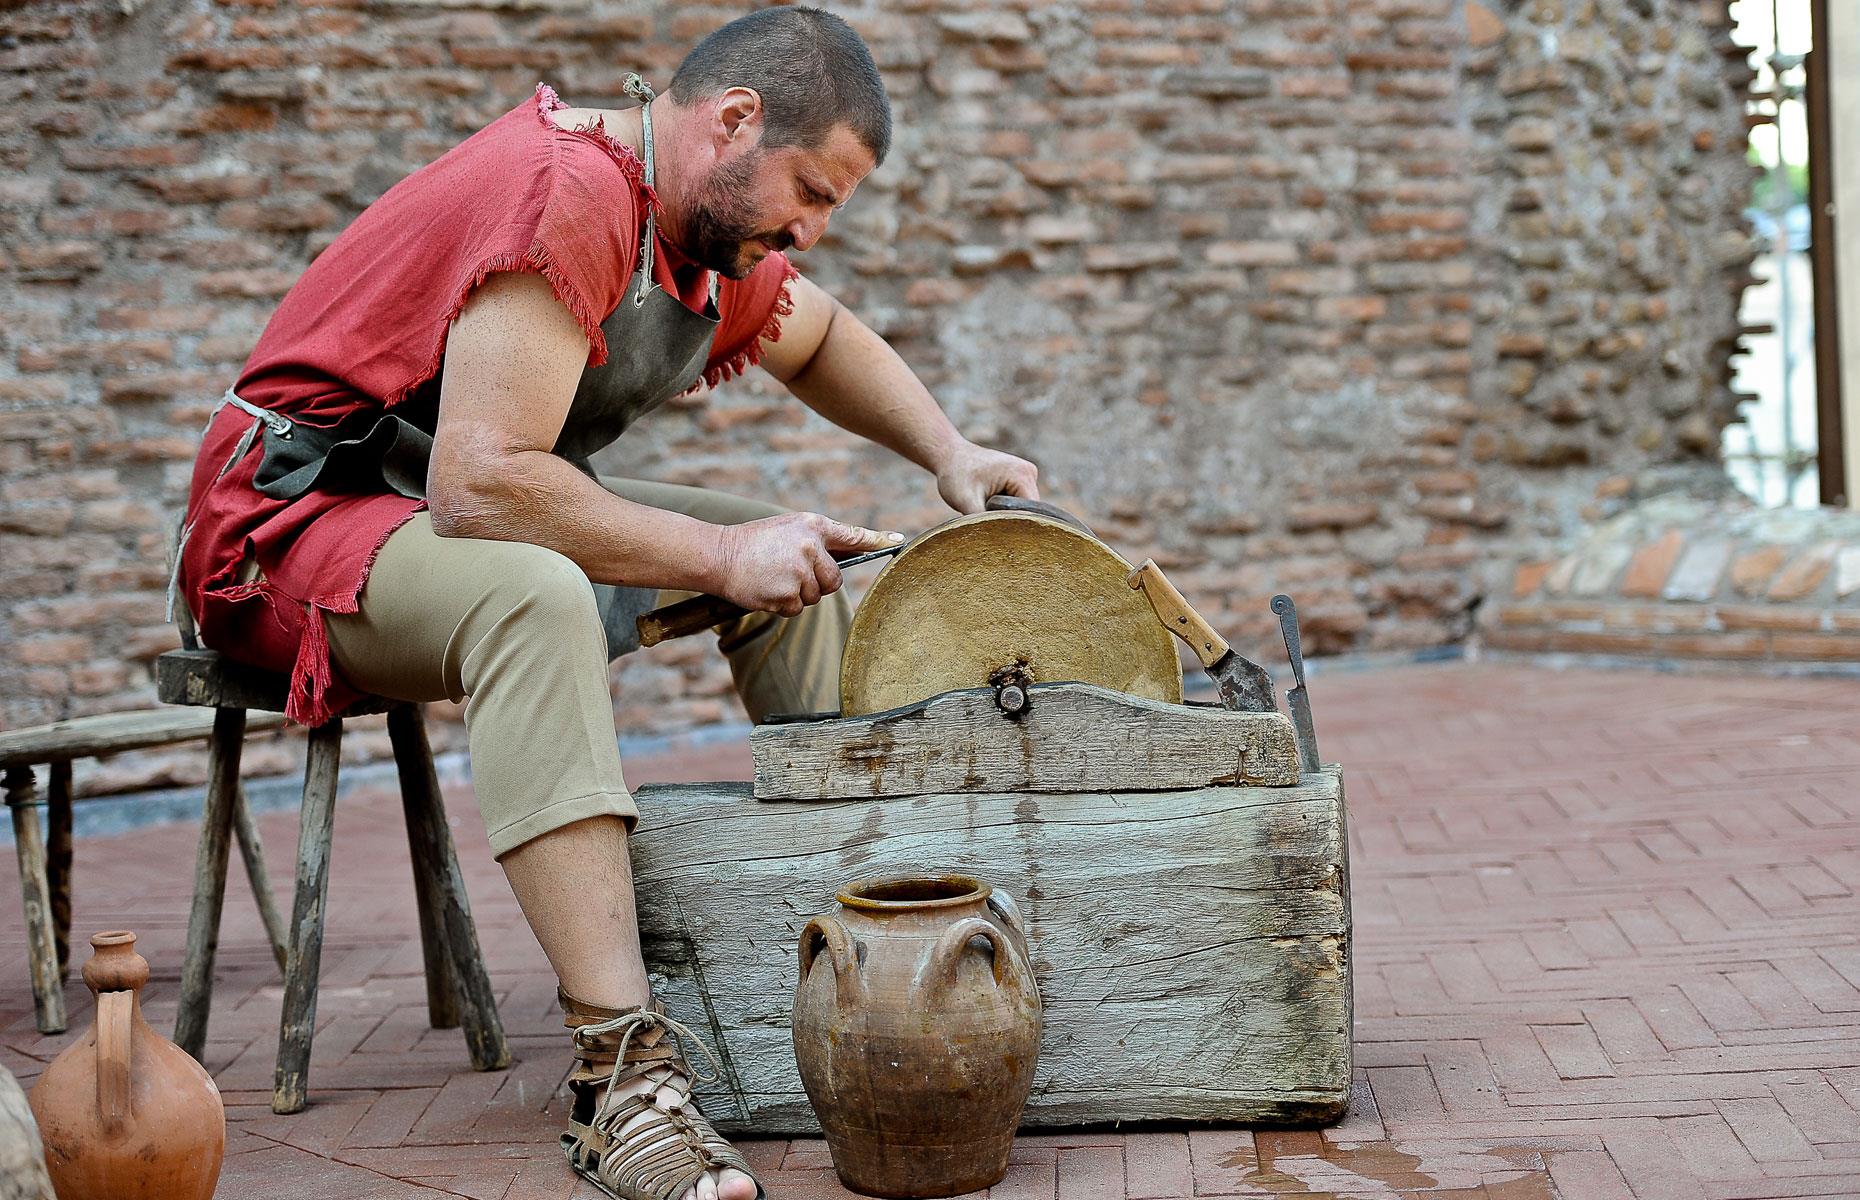 Artisan in imperial Rome: six hours a day, 185 days a year